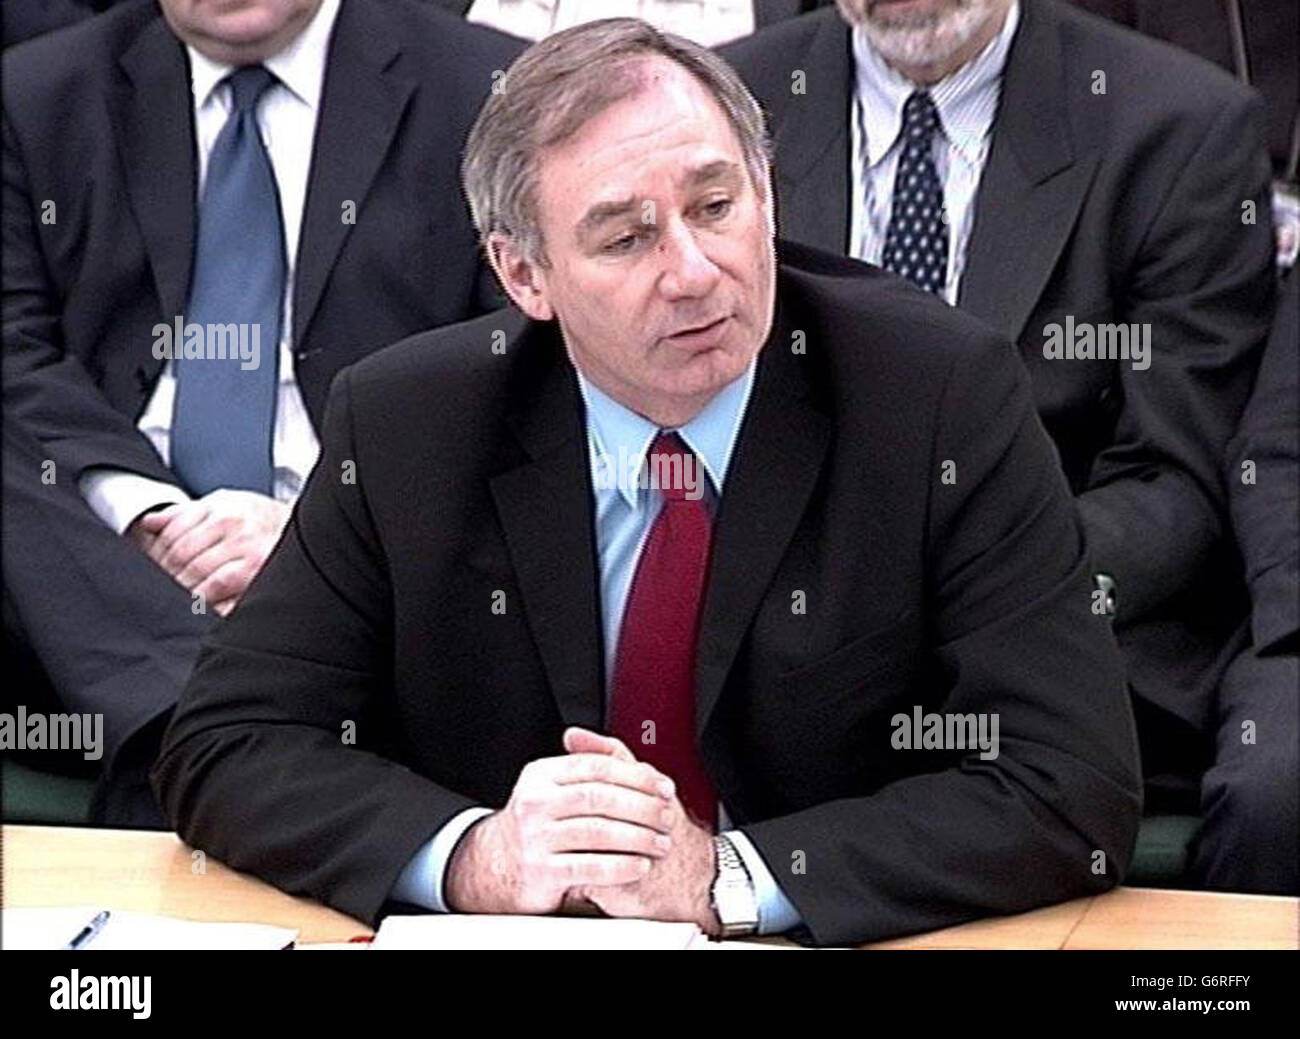 Defence Secretary Geoff Hoon appears in the Thatcher Room before the Commons Defence Select Committee, to be quizzed on the war against Iraq. Mr Hoon told MPs last night that he knew the 45-minute claim in the document referred only to short-range battlefield weapons, hours after Prime Minister Tony Blair had admitted he had no knowledge of what the claim referred to. Stock Photo